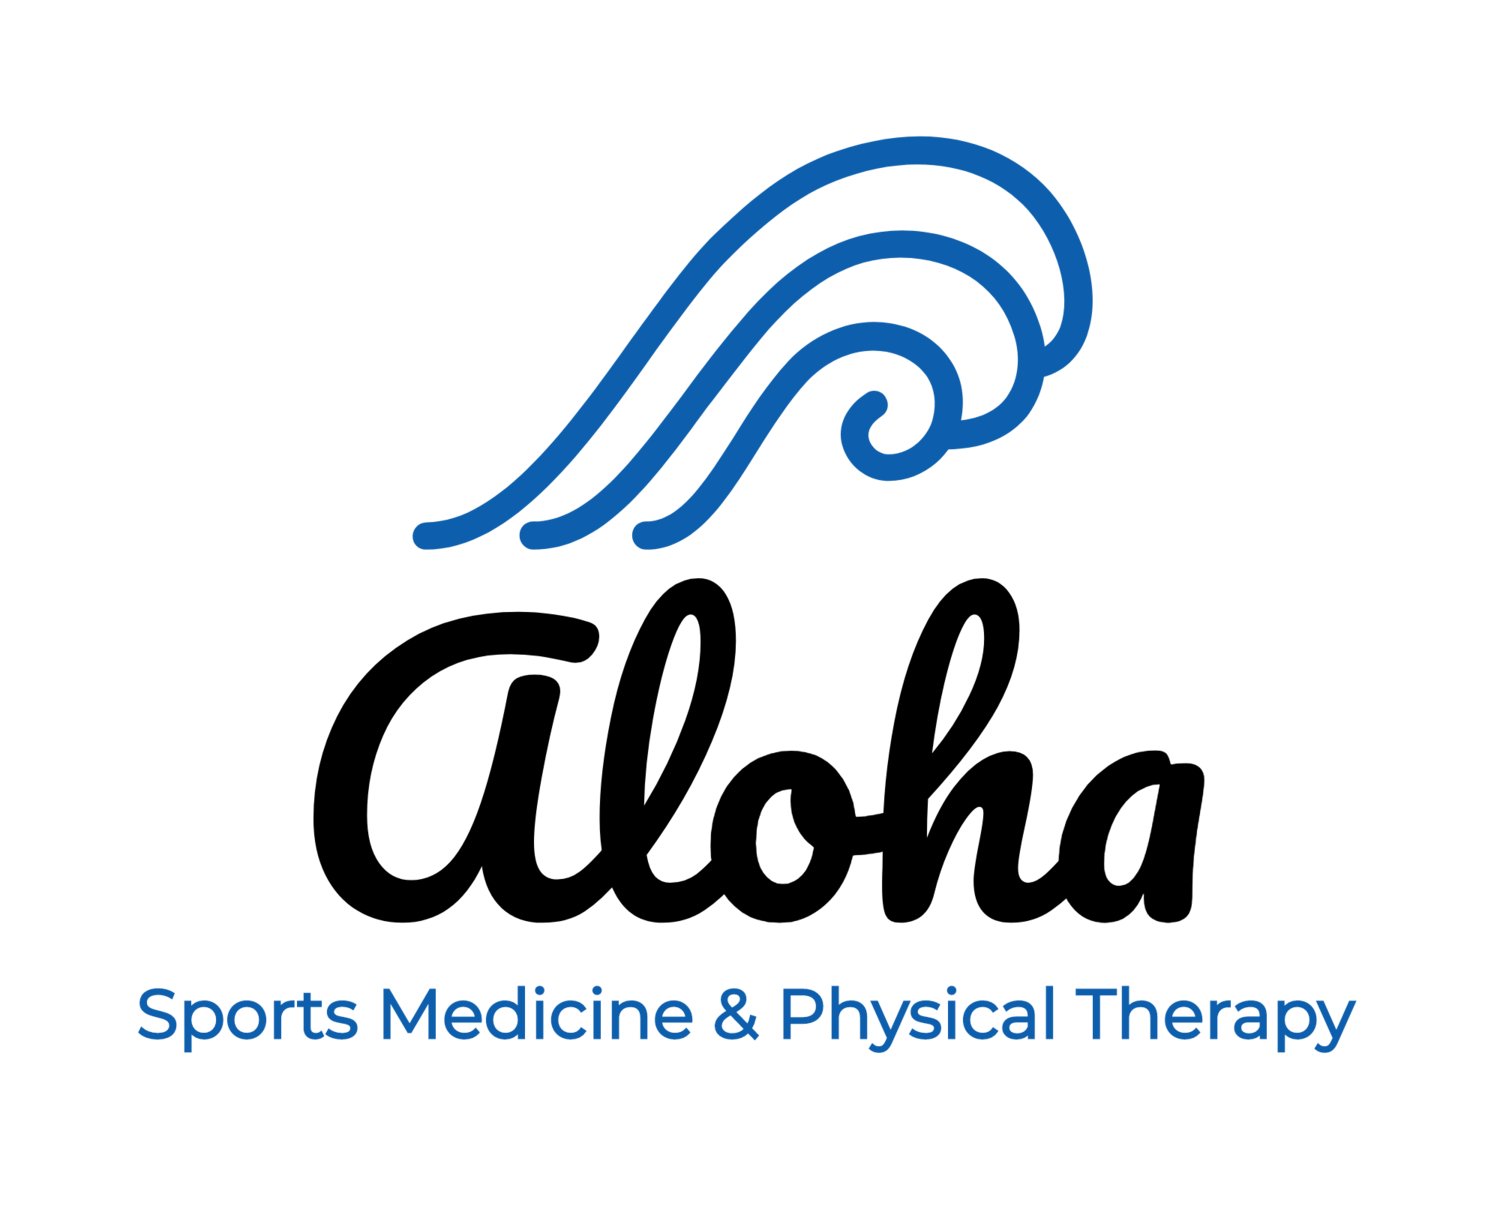 Aloha Sports Medicine & Physical Therapy